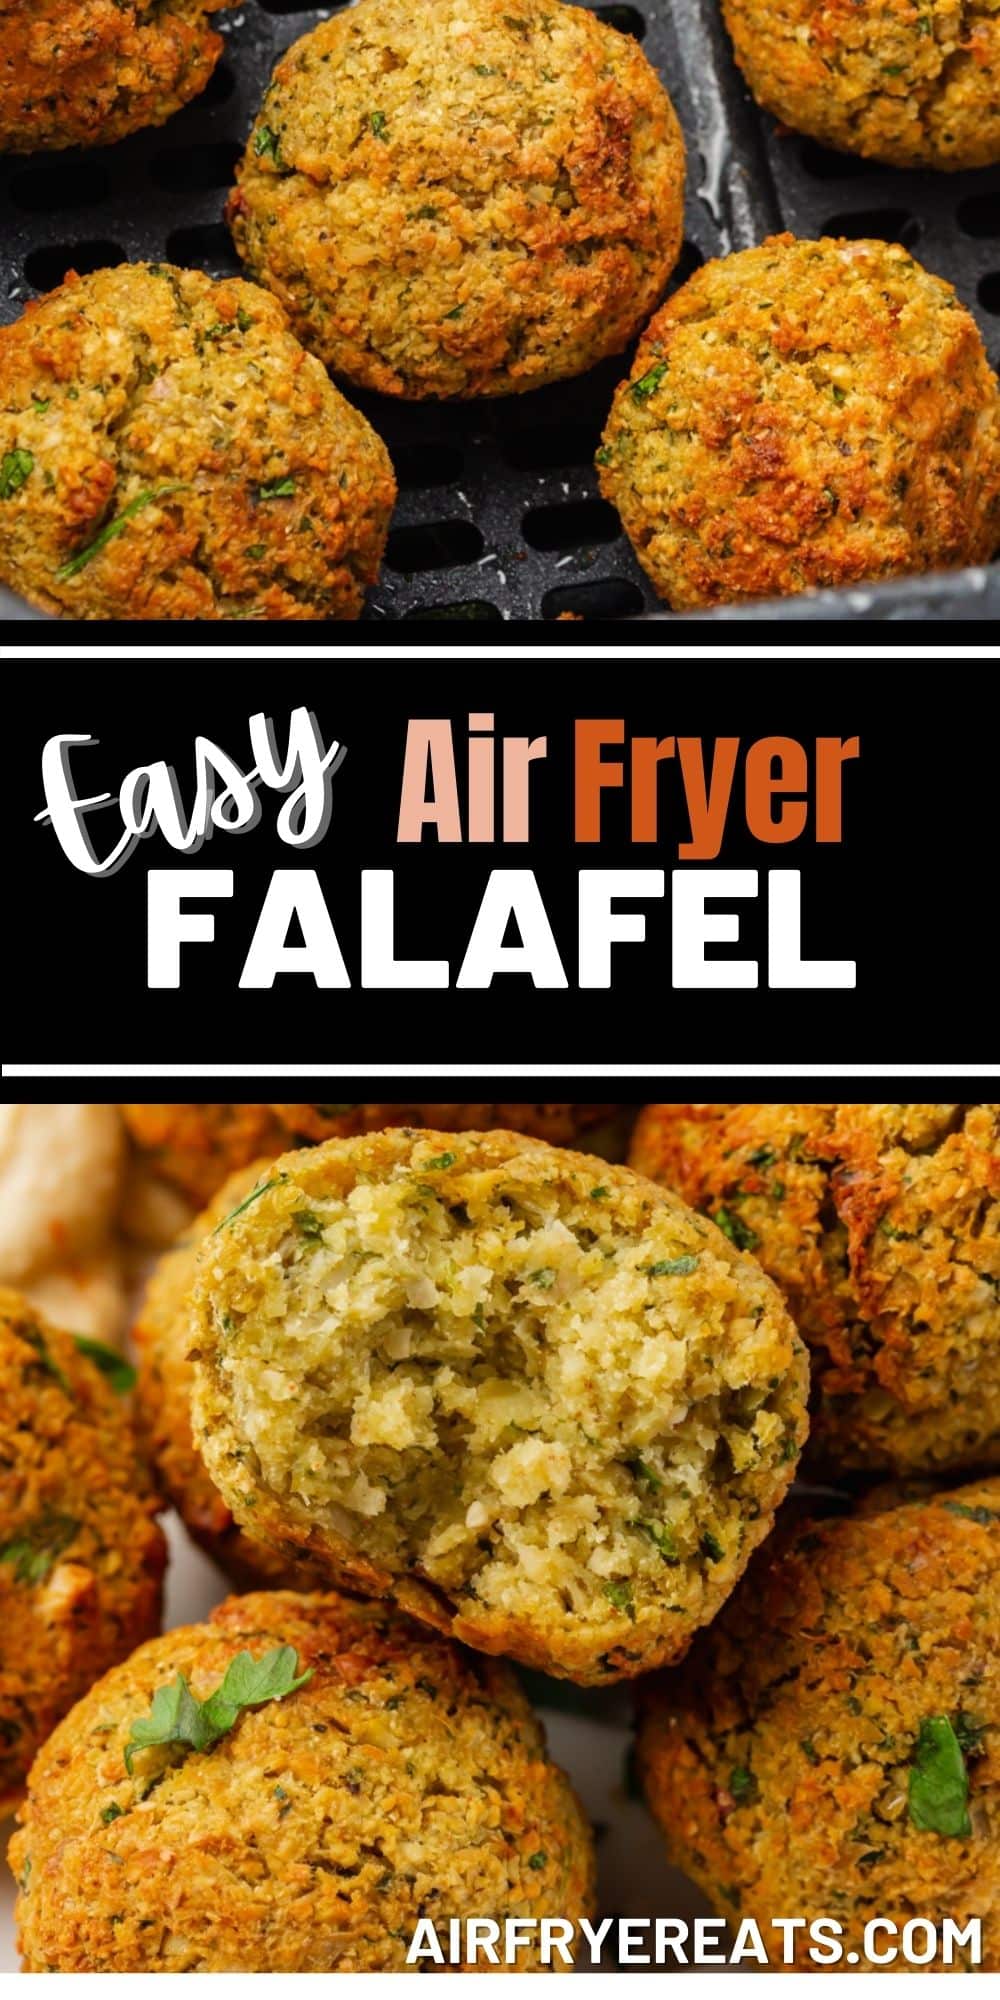 photos of air fryer falafel, with a black box in the center. Text reads, "easy air fryer falafel"